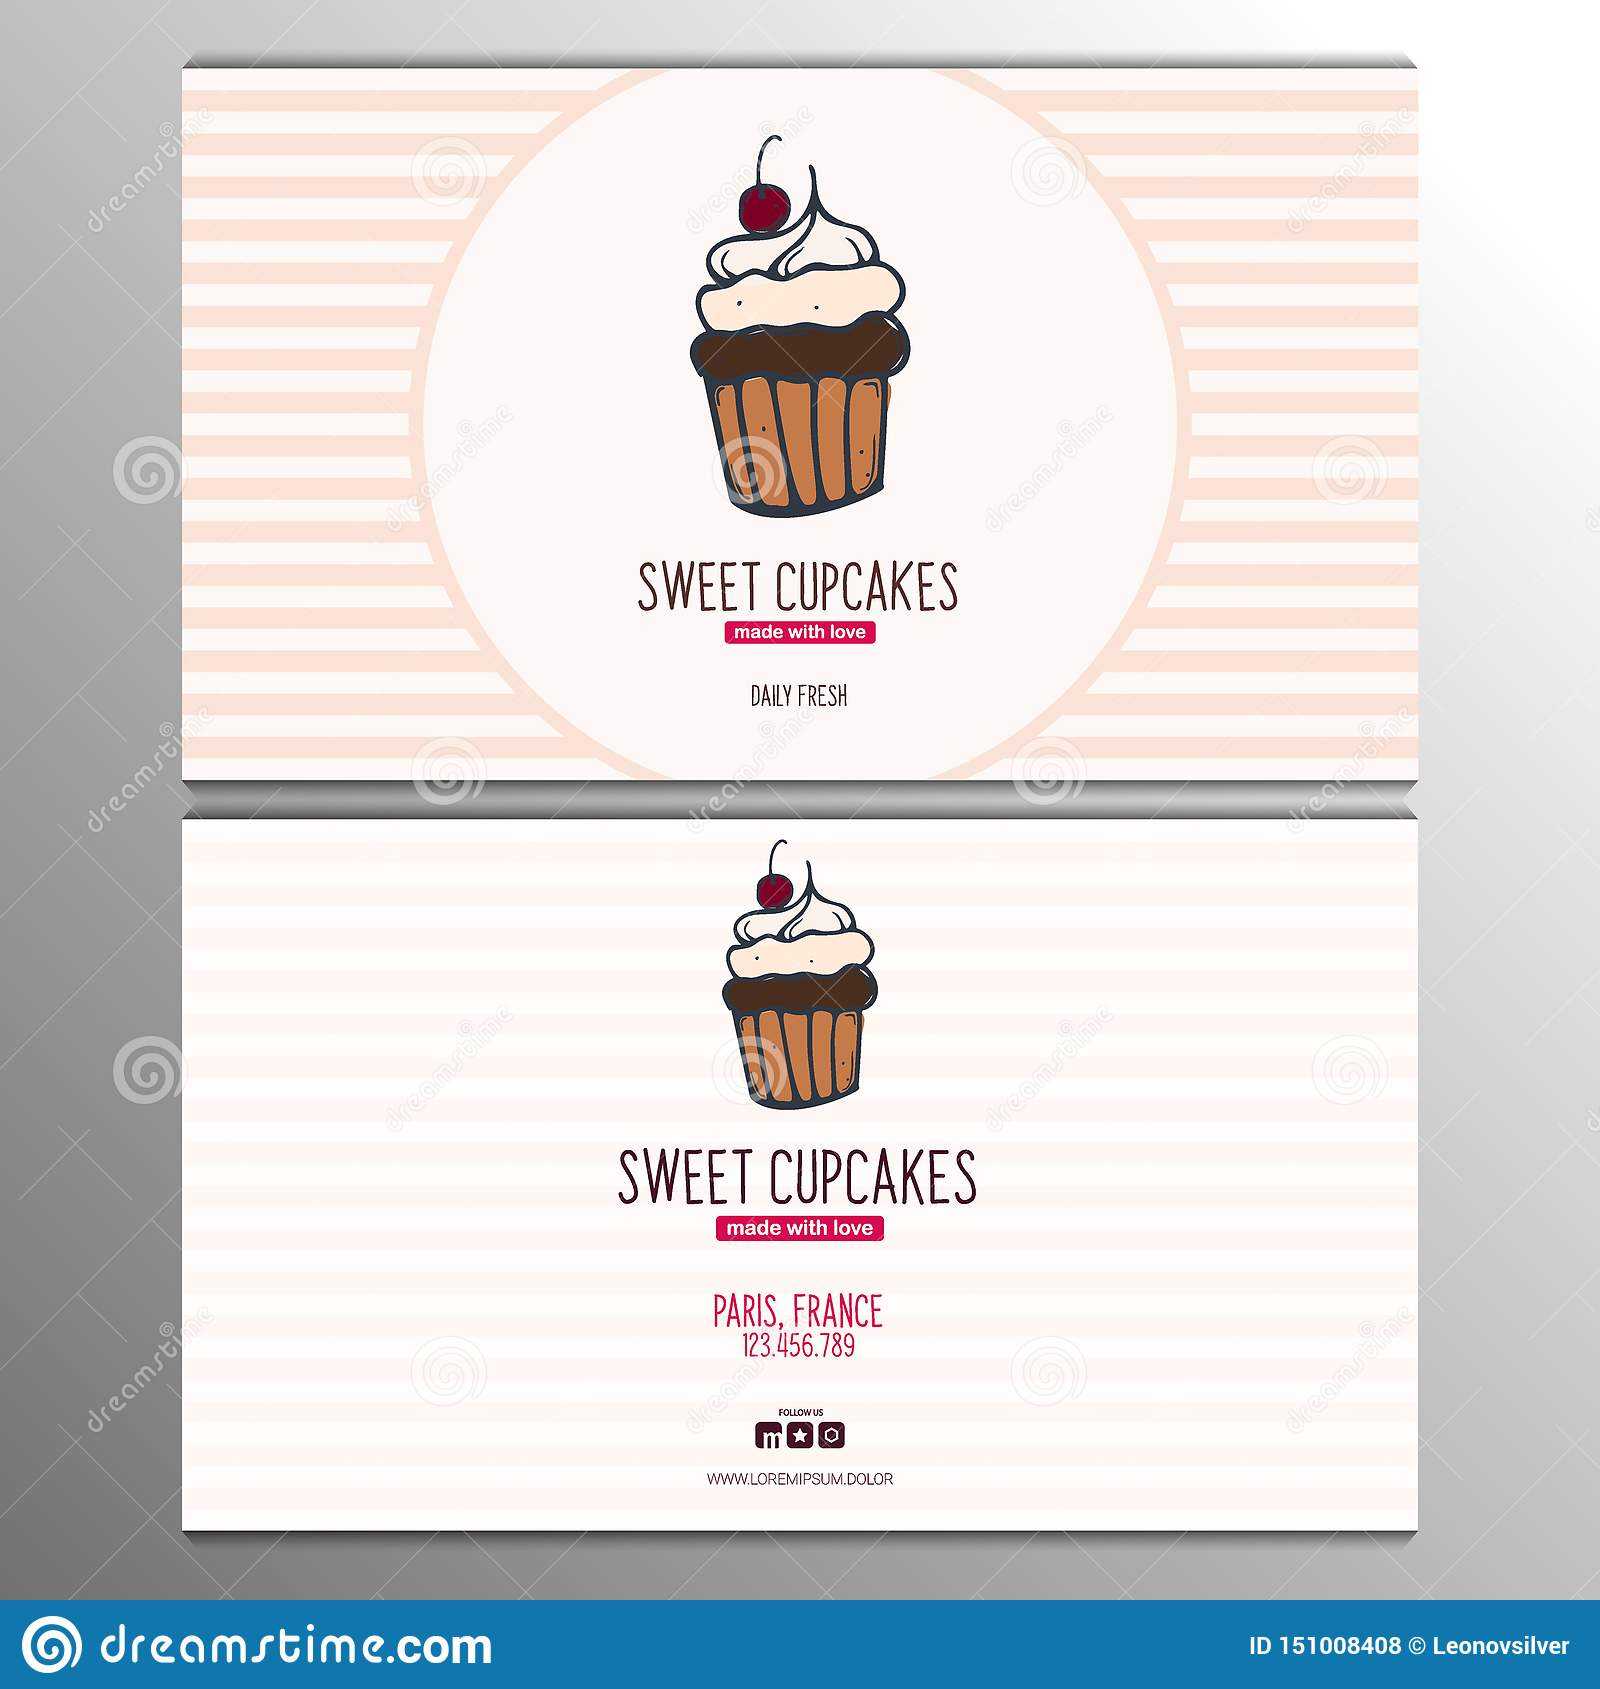 Cupcake Or Cake Business Card Template For Bakery Or Pastry Inside Cake Business Cards Templates Free